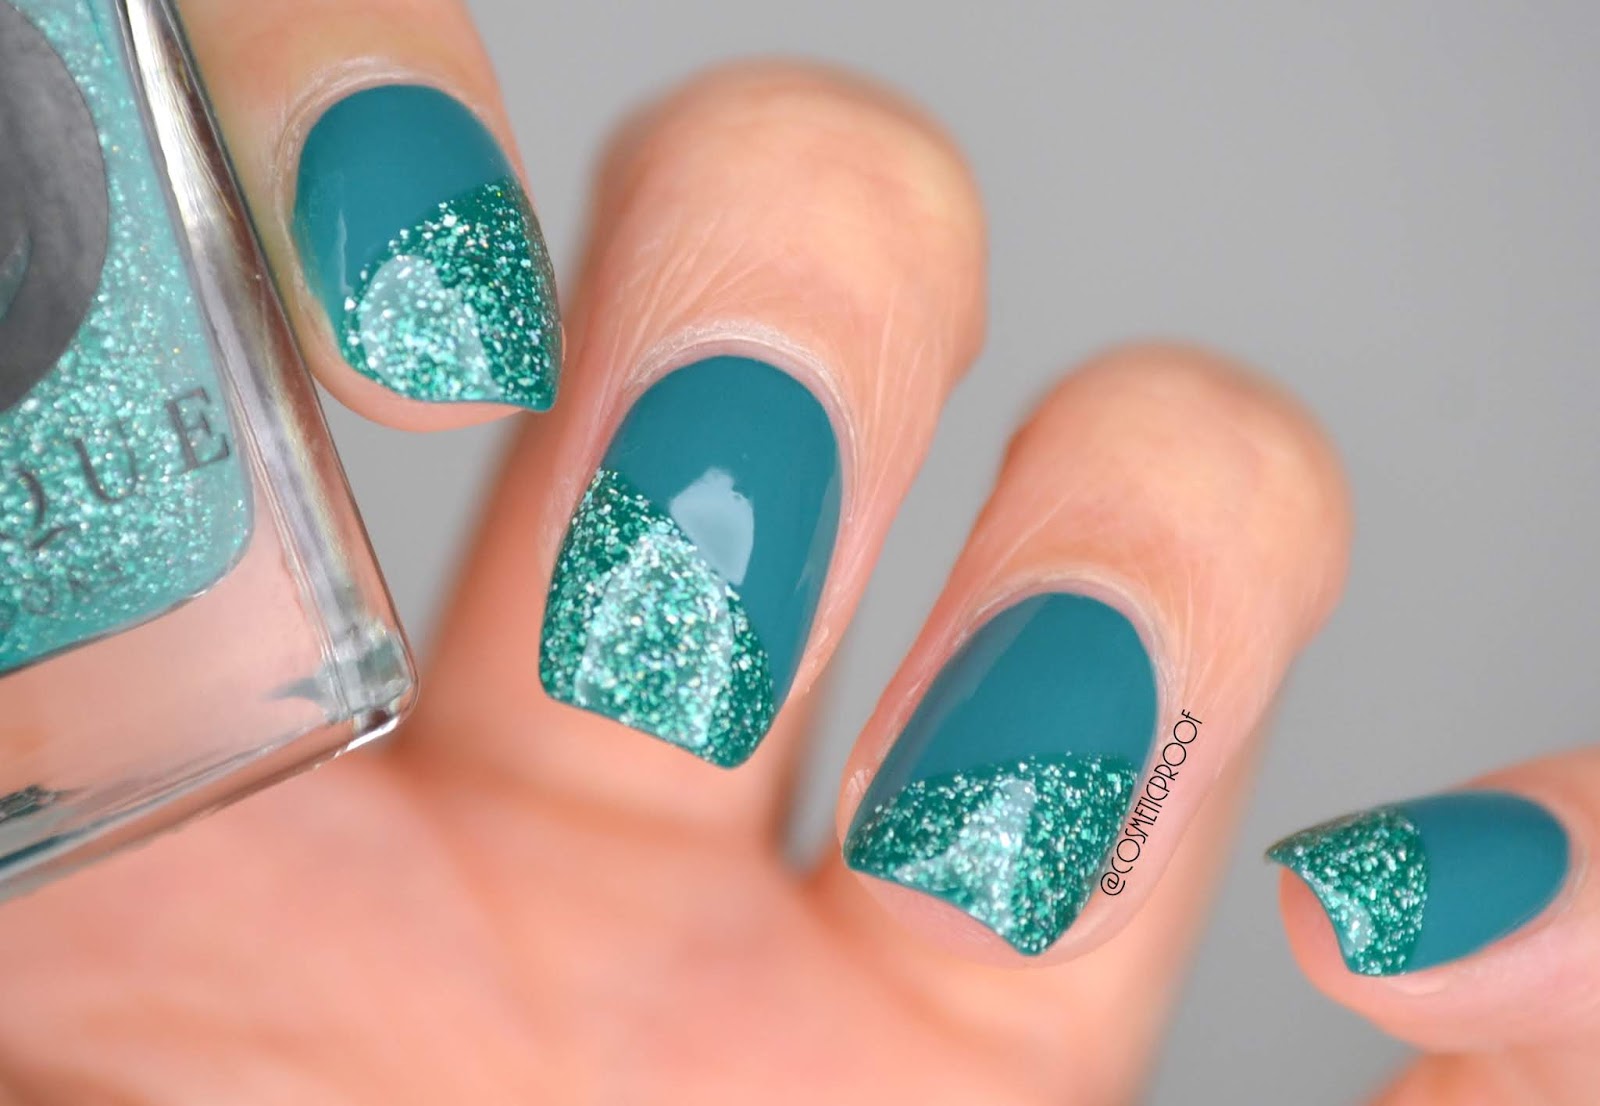 Teal Flower Nail Art Stickers - wide 4